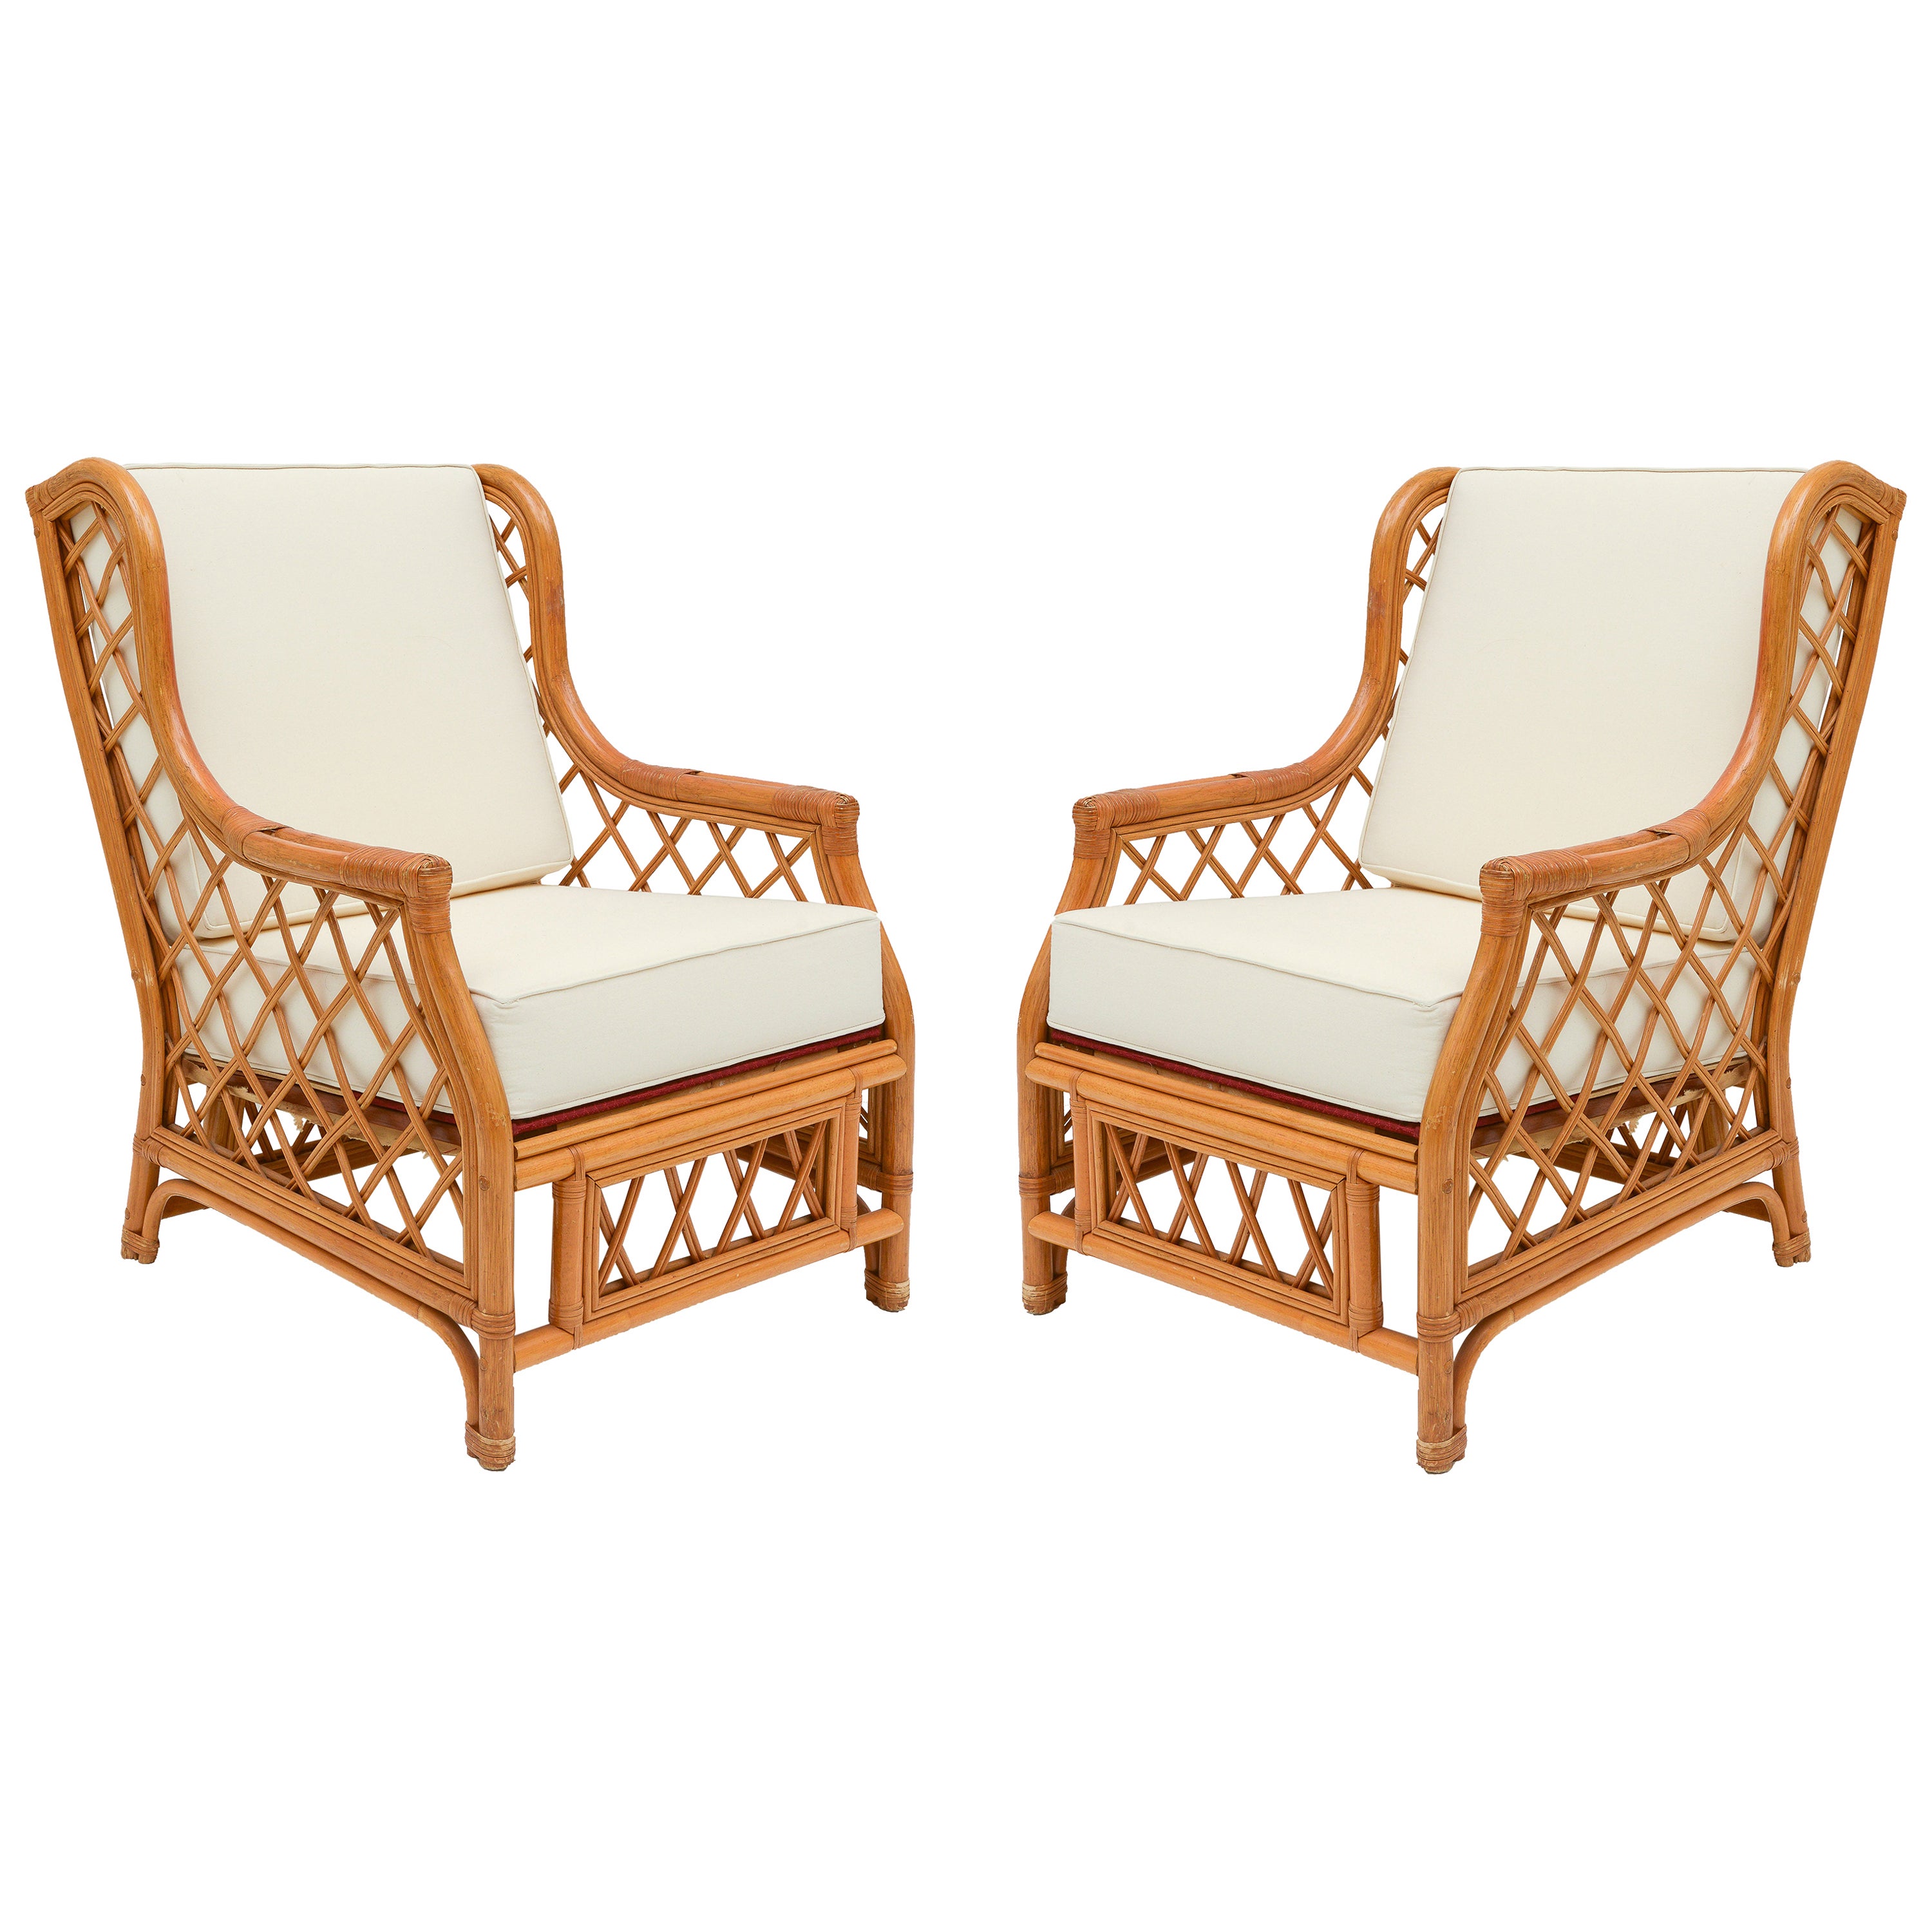 Beautiful pair of bamboo rattan pair of vintage club chairs with newly made white cushions. Large scale chair with incredible detailing throughout. France.